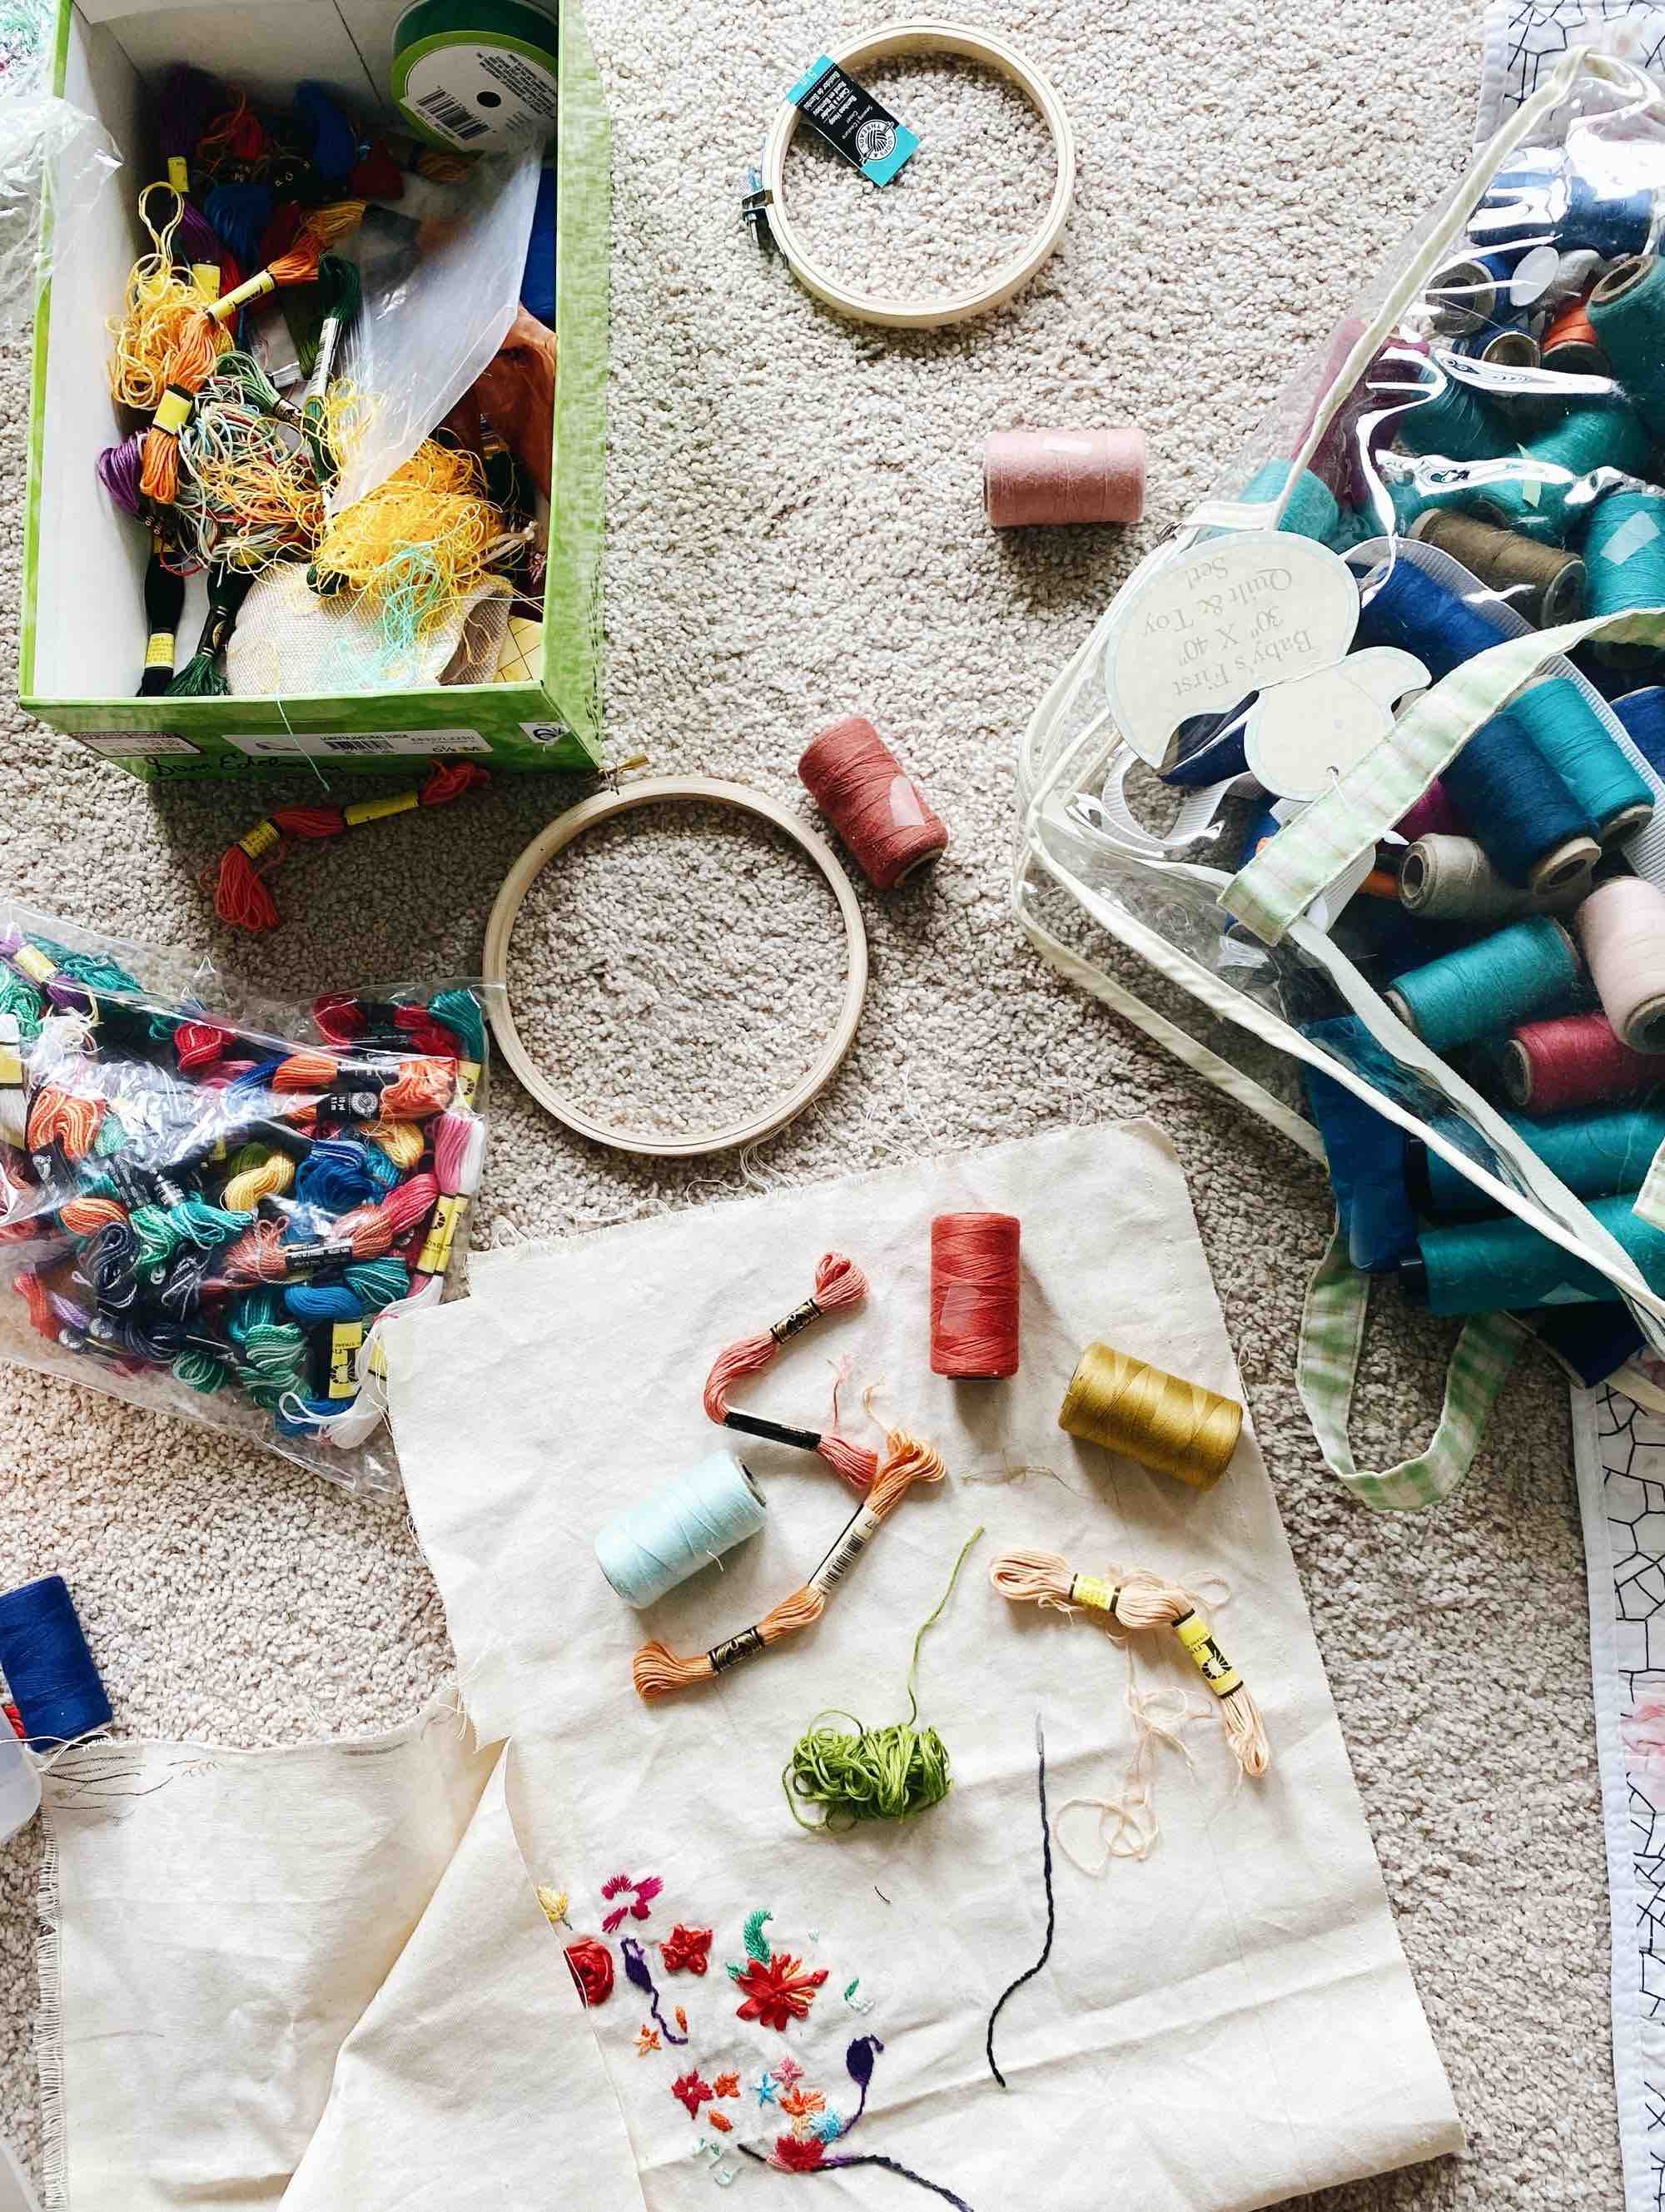 Various embroidery tools scattered on a carpet